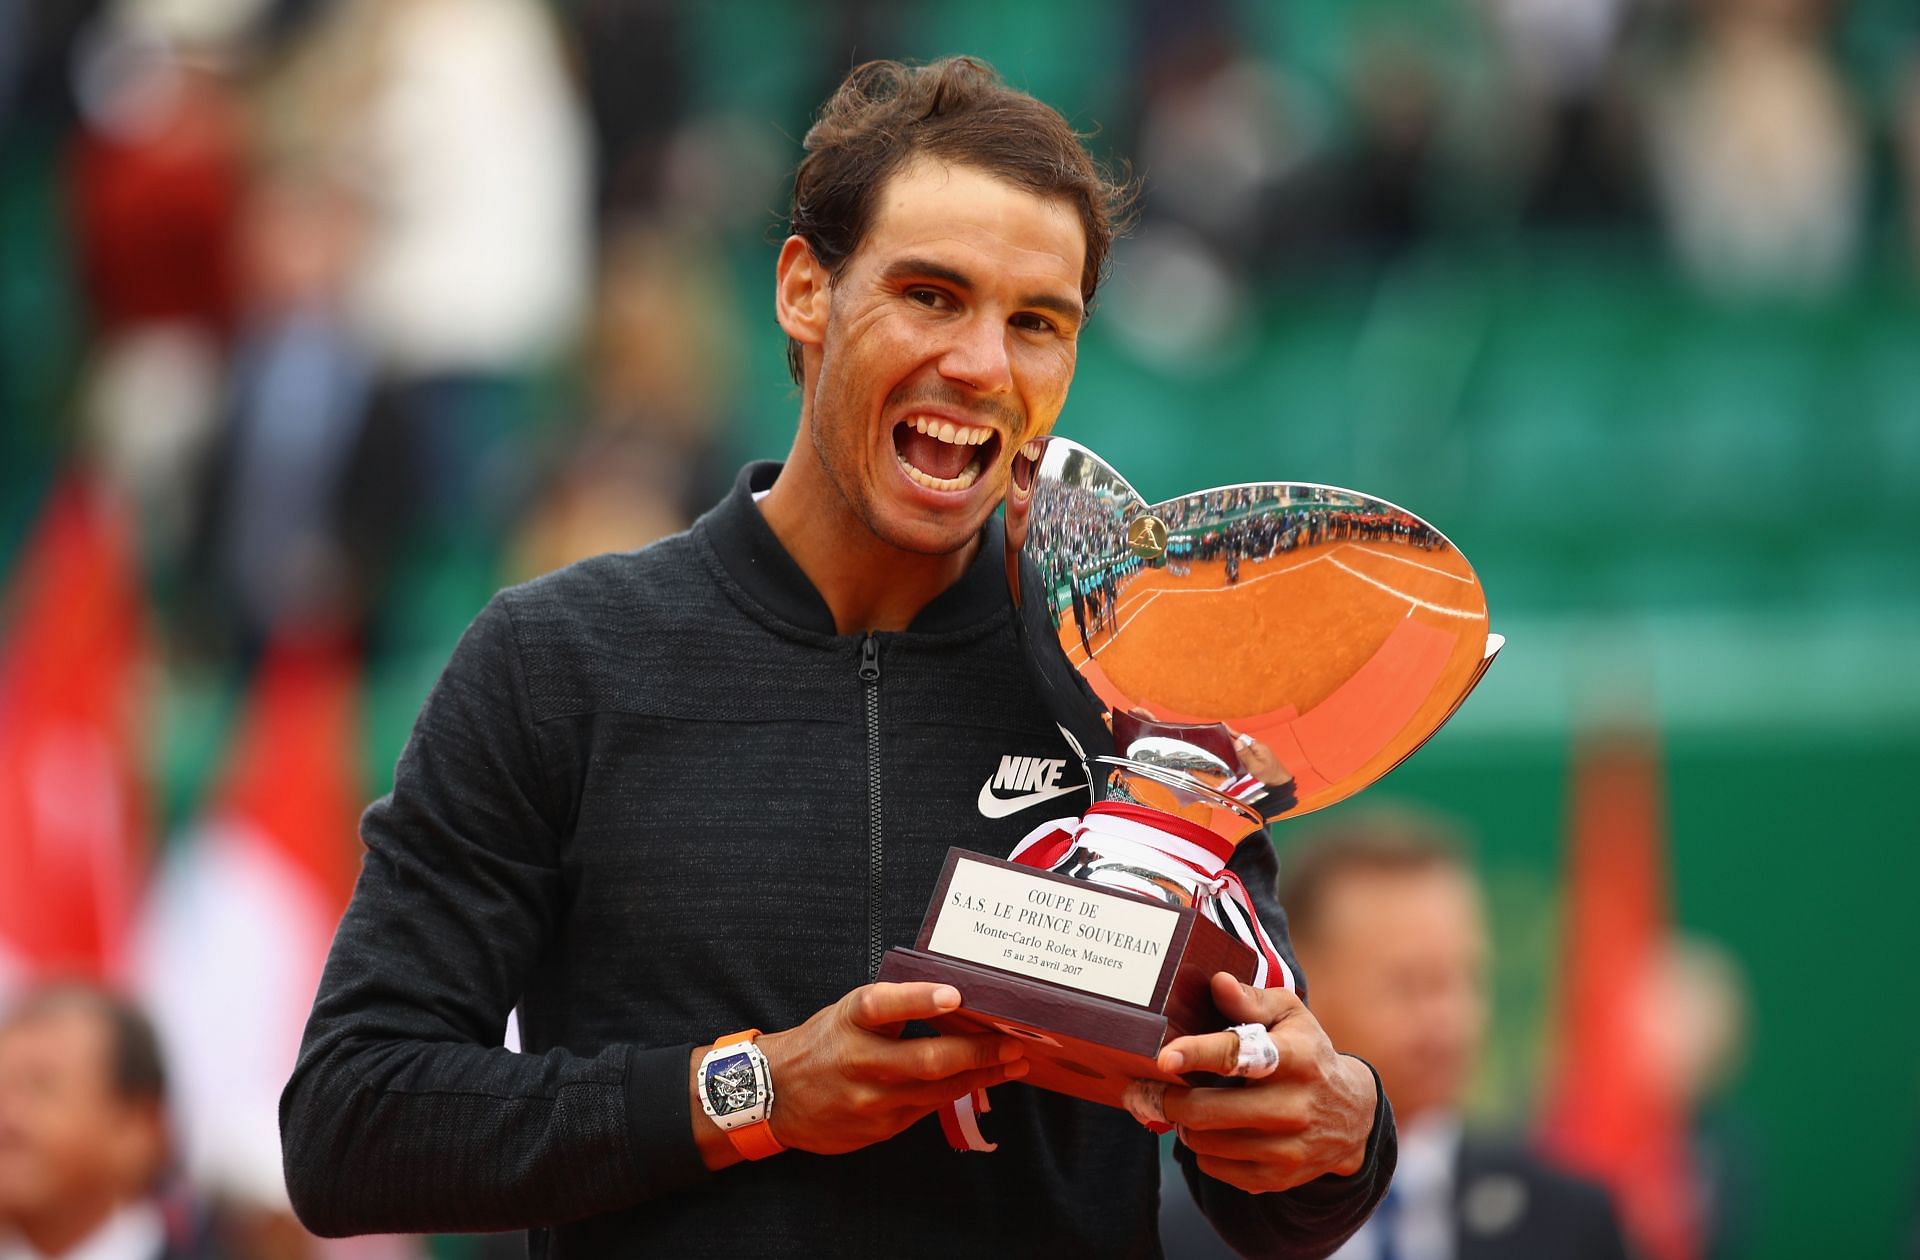 Rafael Nadal won his 50th clay title at the 2017 Monte-Carlo Masters